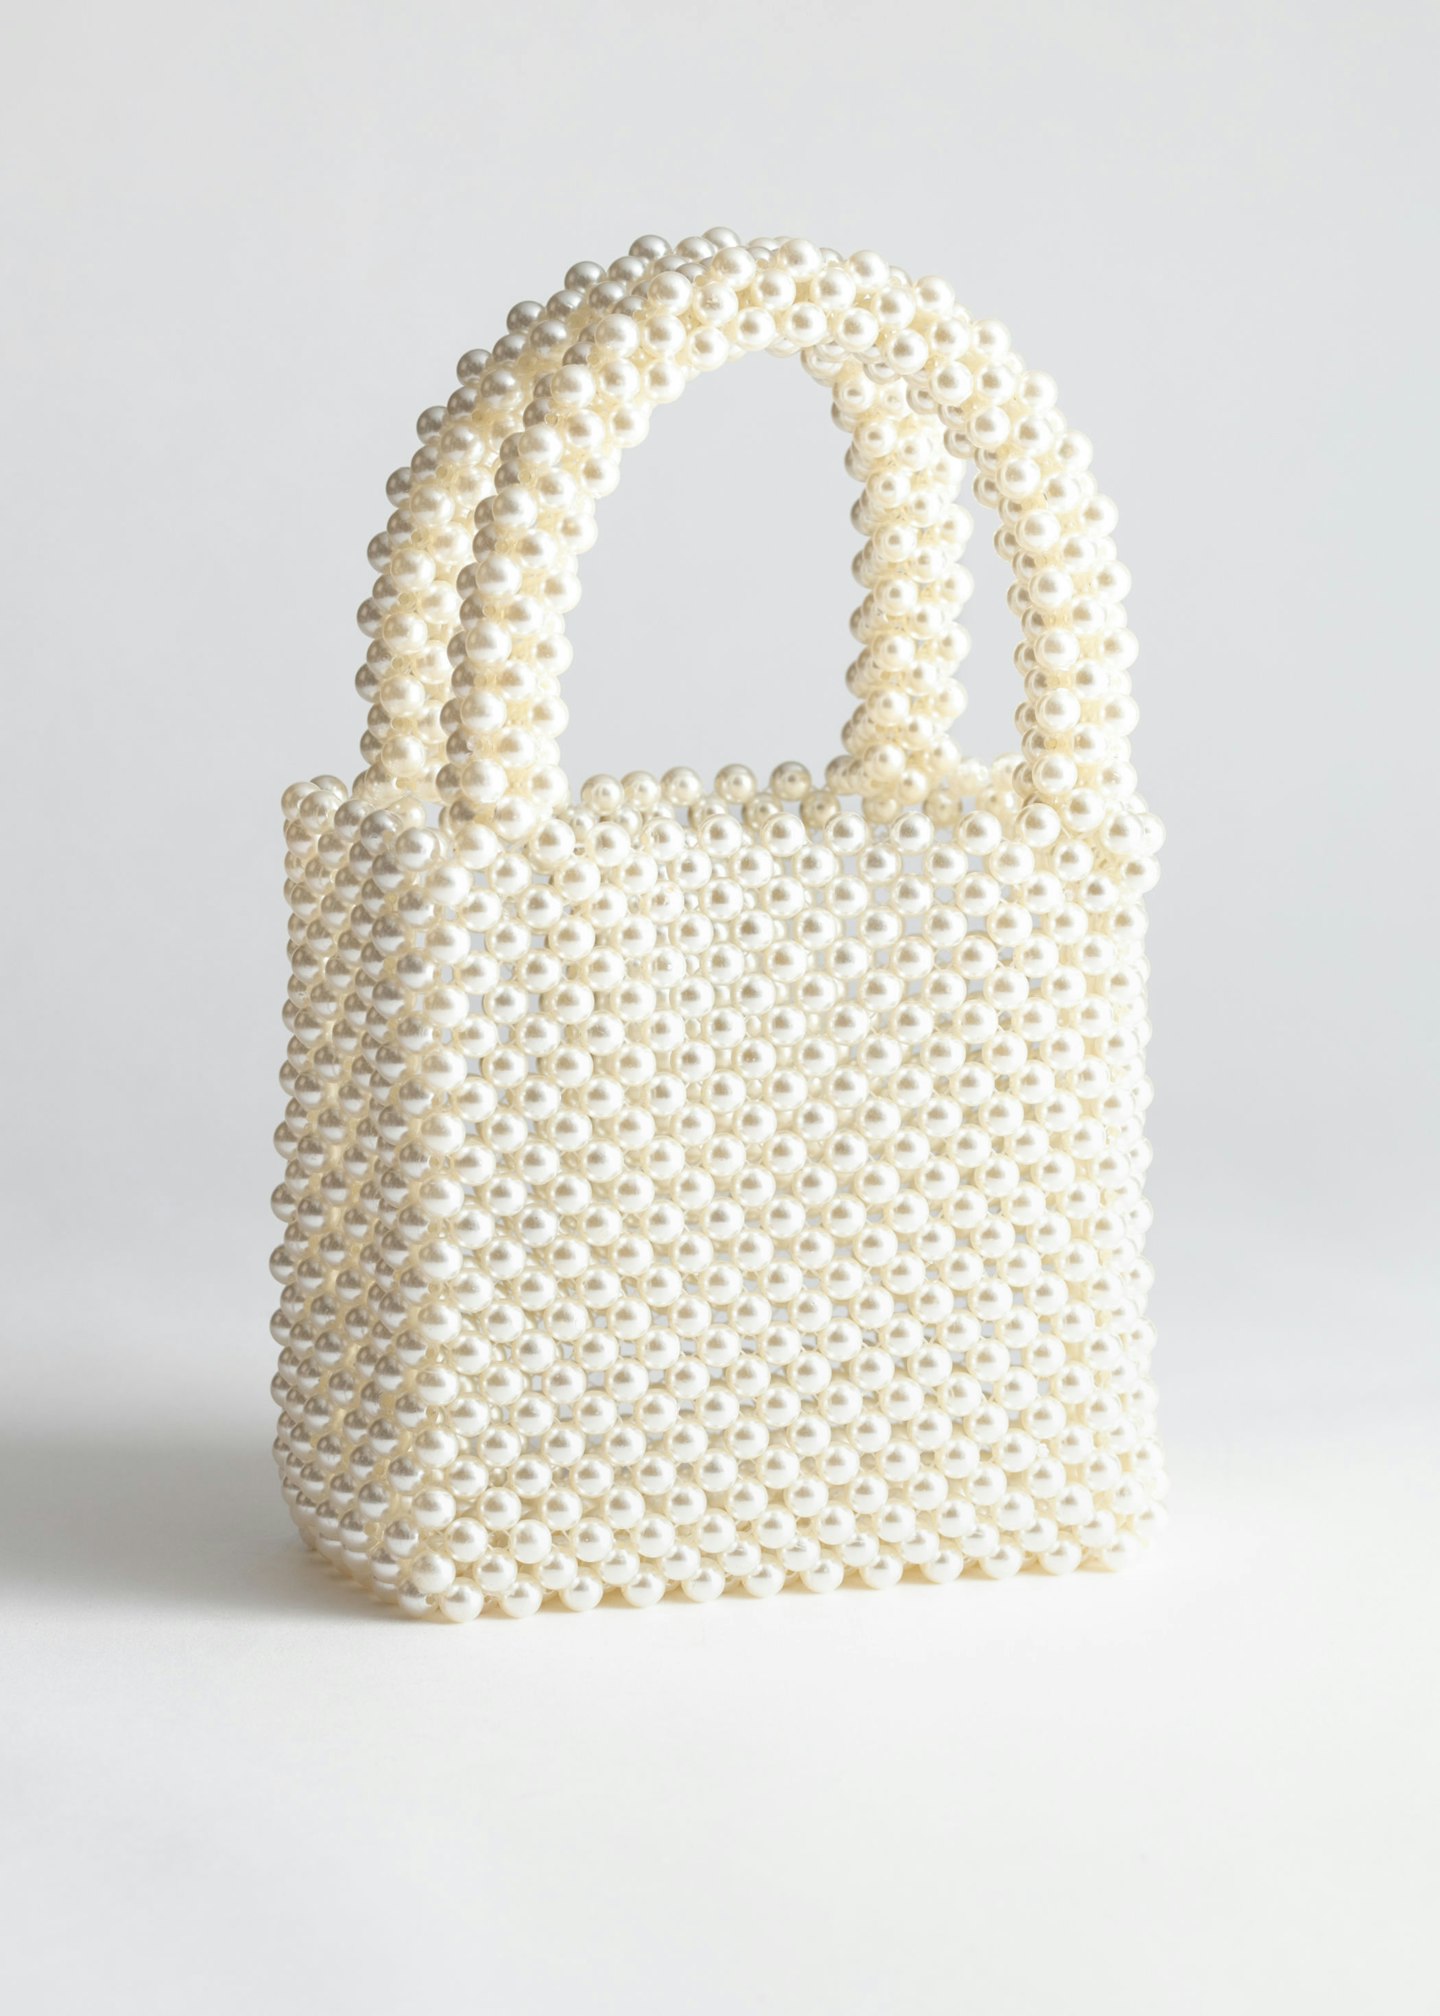 & Other Stories, Pearlescent Beaded Clutch Bag, £55